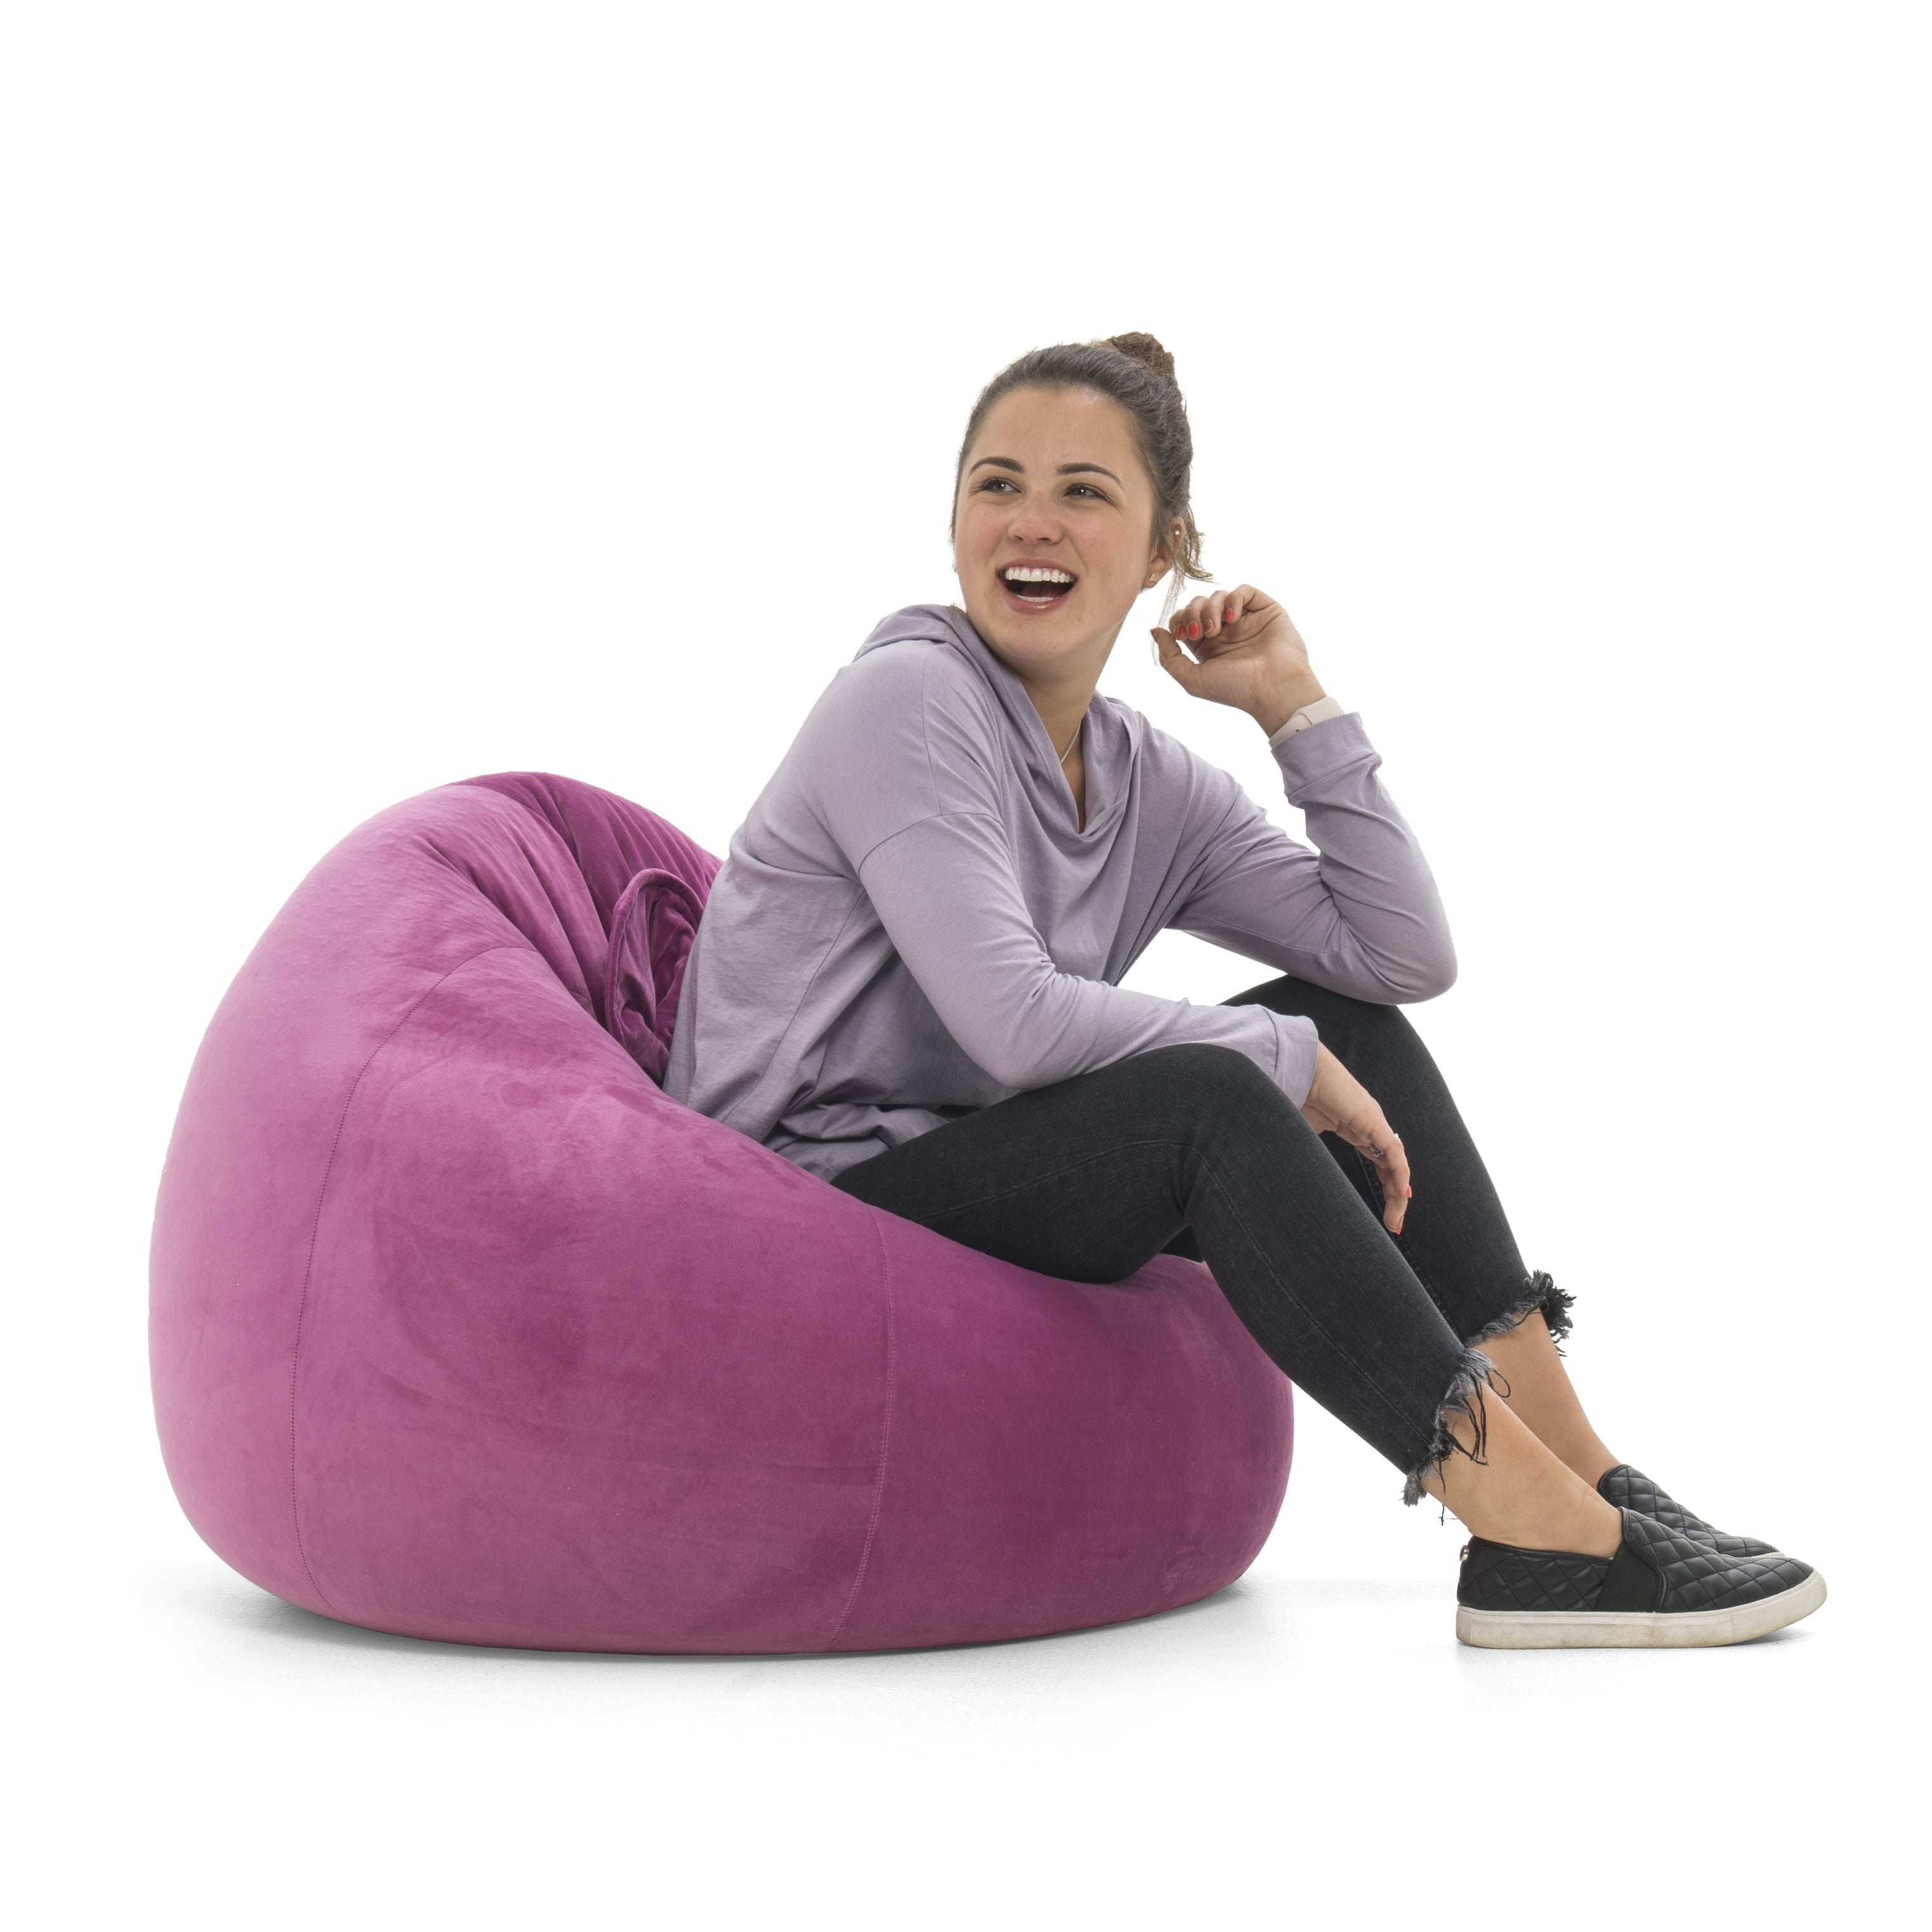 Multifunctional Bean Bag Chair, Large Adult Childrens Living Room